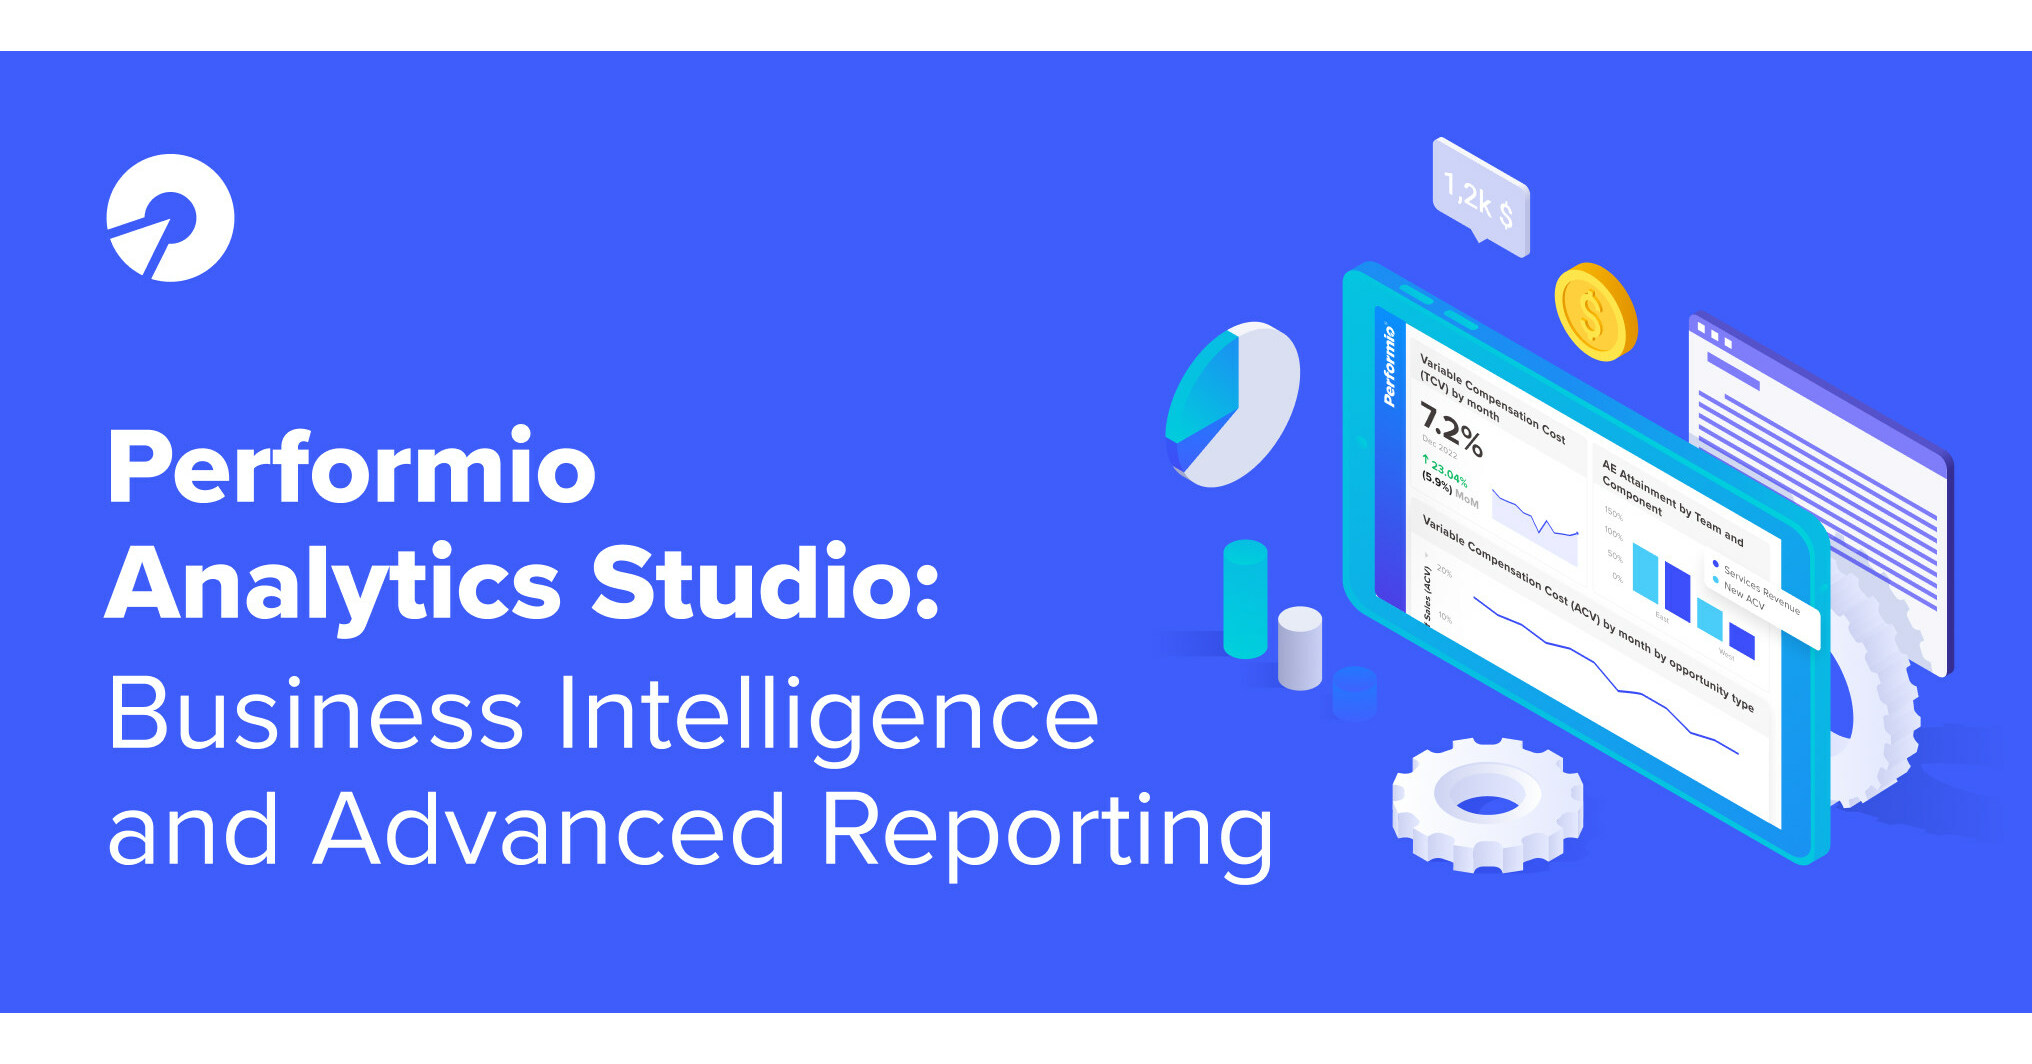 Performio Launches Business Intelligence and Advanced Reporting Capabilities with Analytics Studio